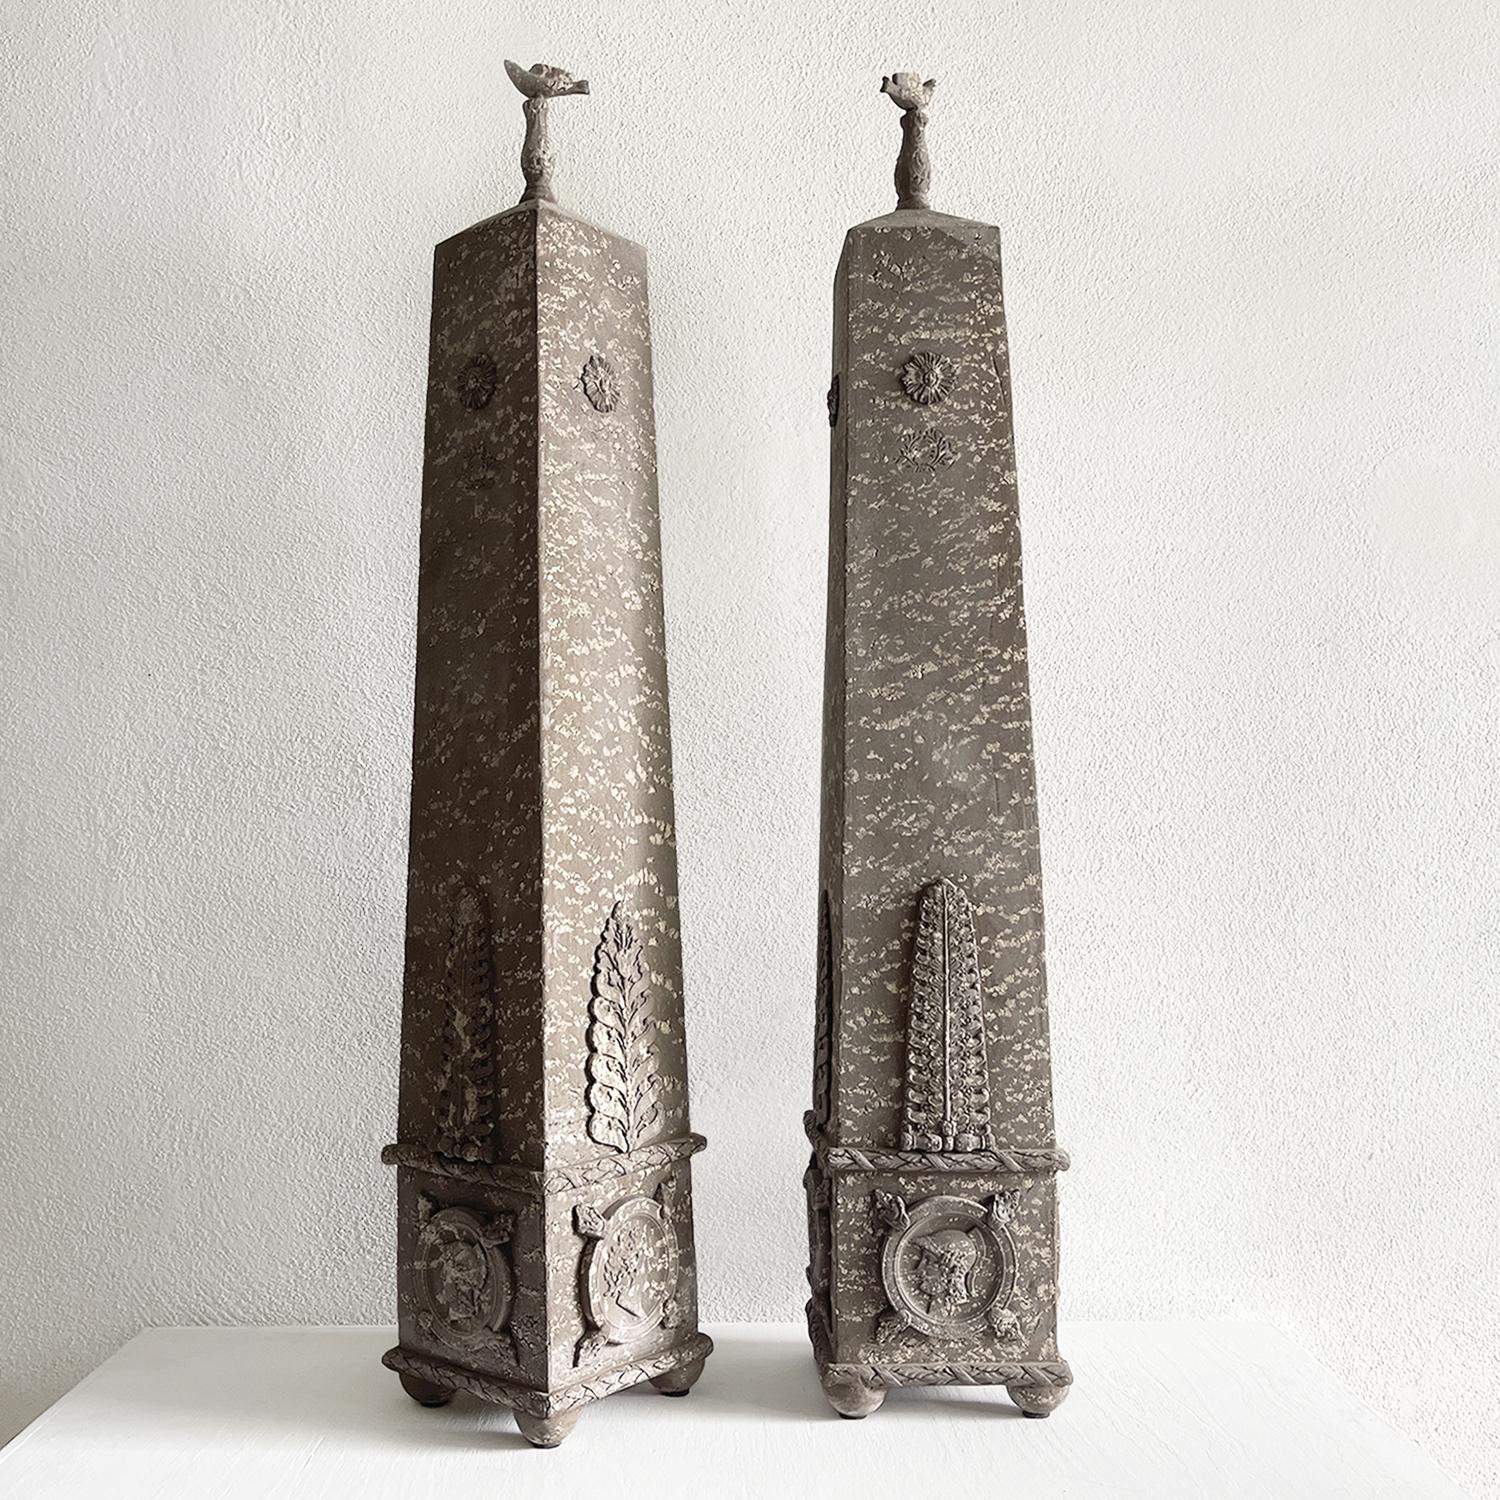 A vintage pair of terre cuite Obelisks in the new classical style, in good condition. The lower part is adorned with small reliefs of mythological profiles - the bodies are decorated with large acanthus leaves, and topped with a small bird. Wear